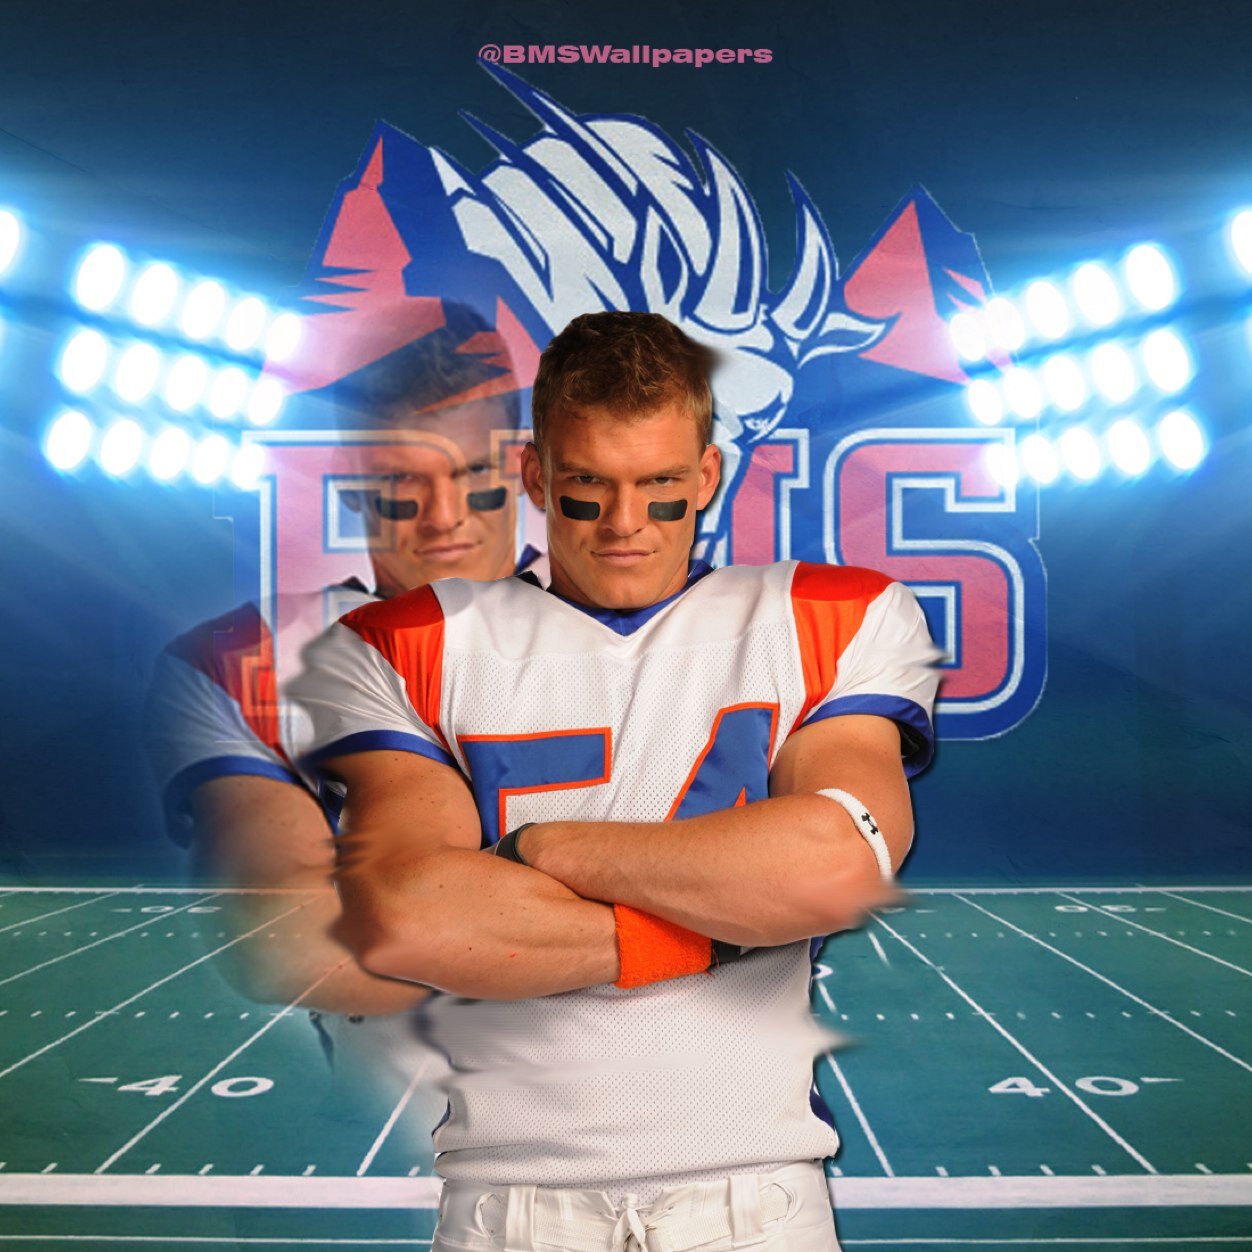 Blue Mountain State BMSWallpapers Twitter 1252x1252